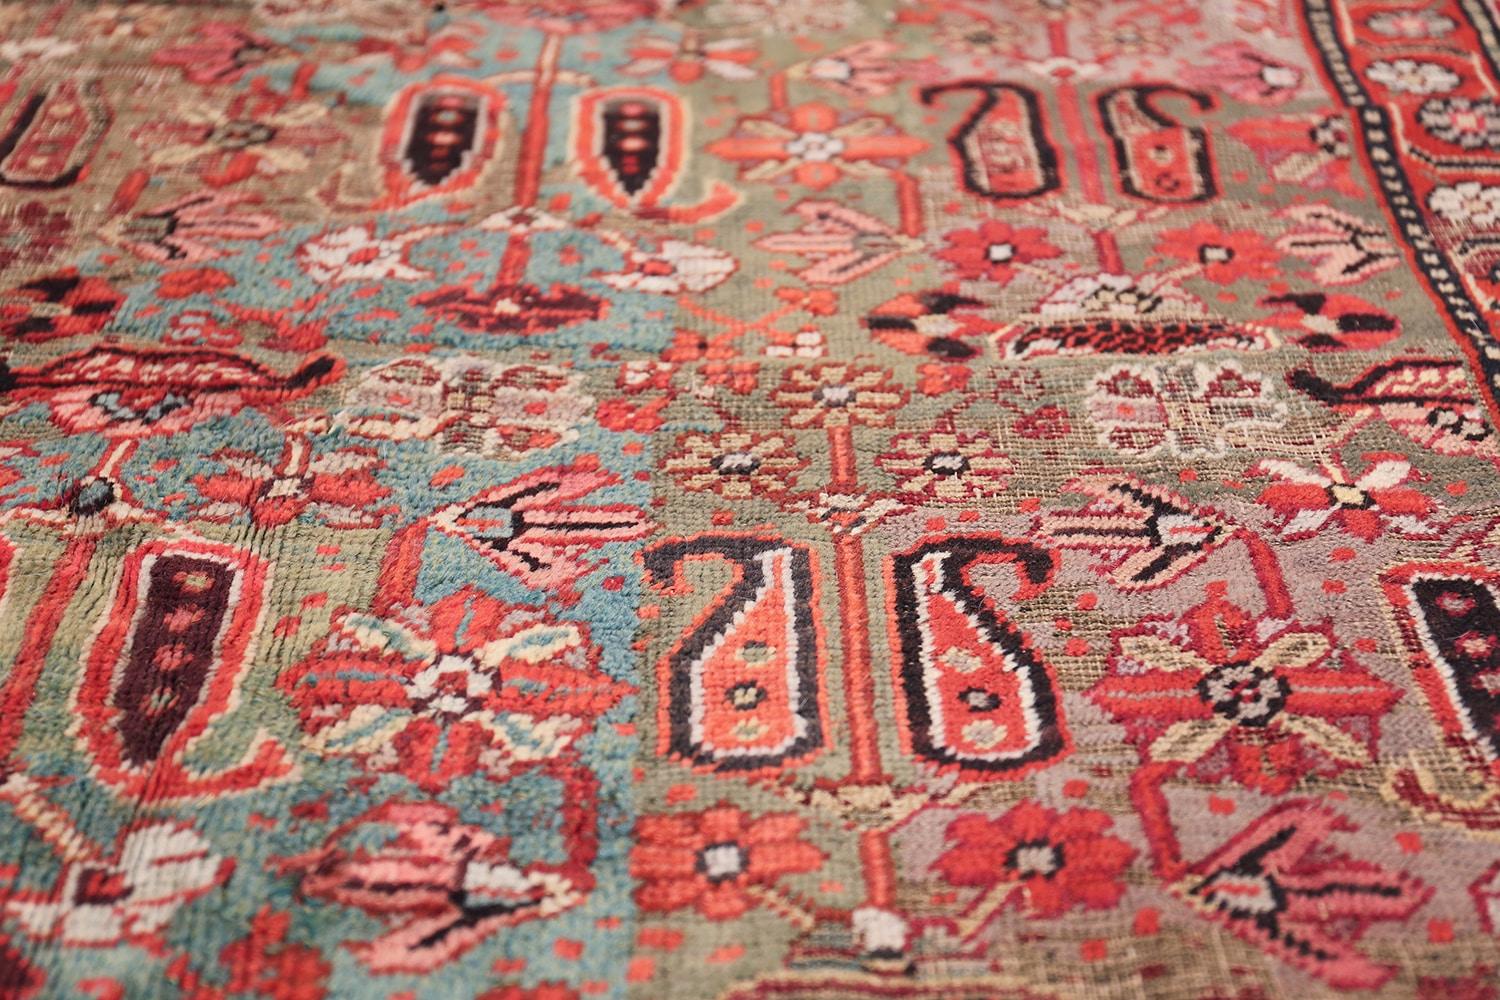 Antique shabby chic Indian rug, country of origin: India, date circa 18th century. Size: 11 ft x 15 ft 5 in (3.35 m x 4.7 m).